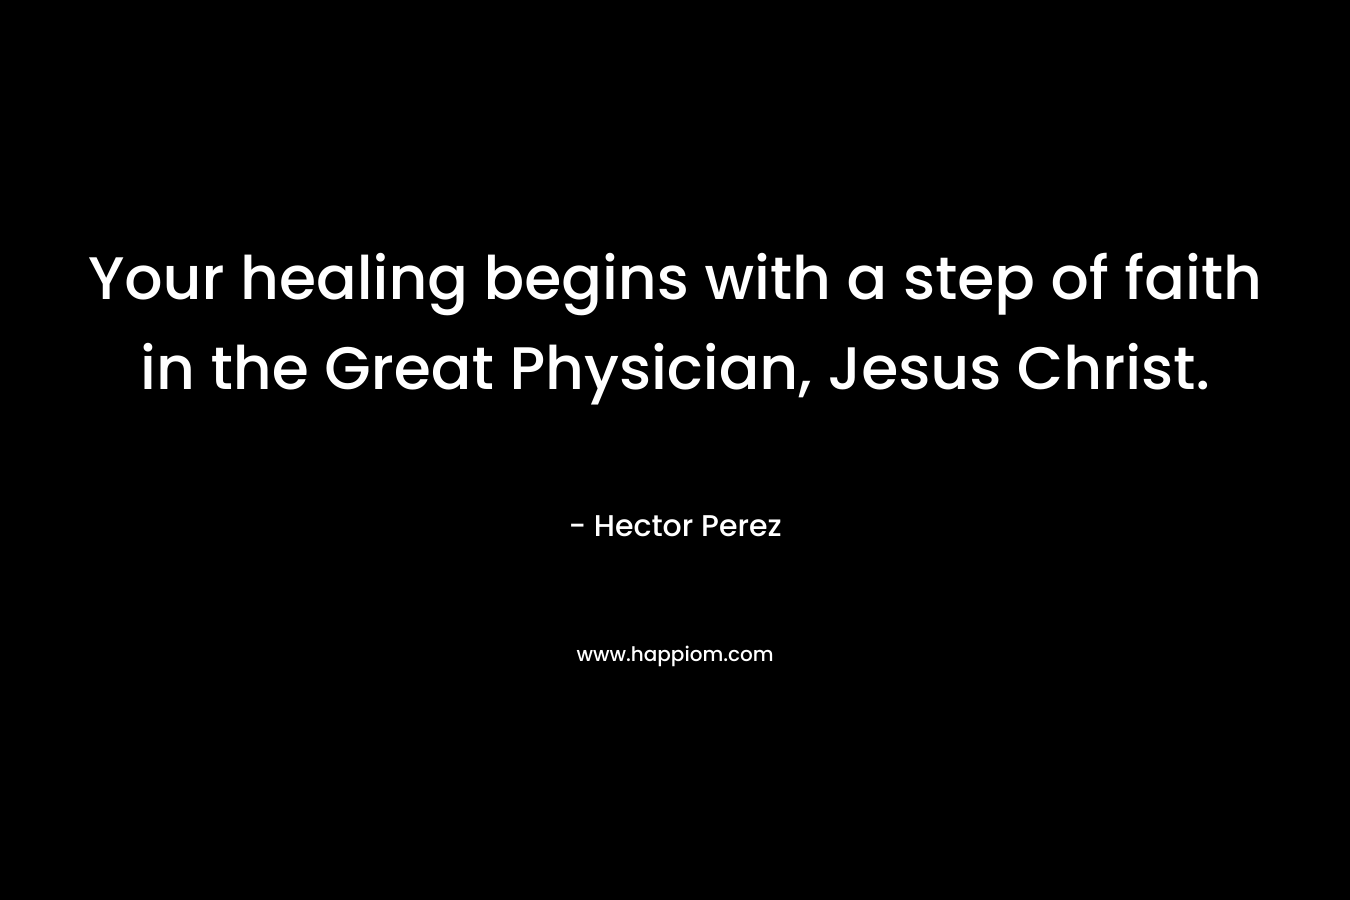 Your healing begins with a step of faith in the Great Physician, Jesus Christ.